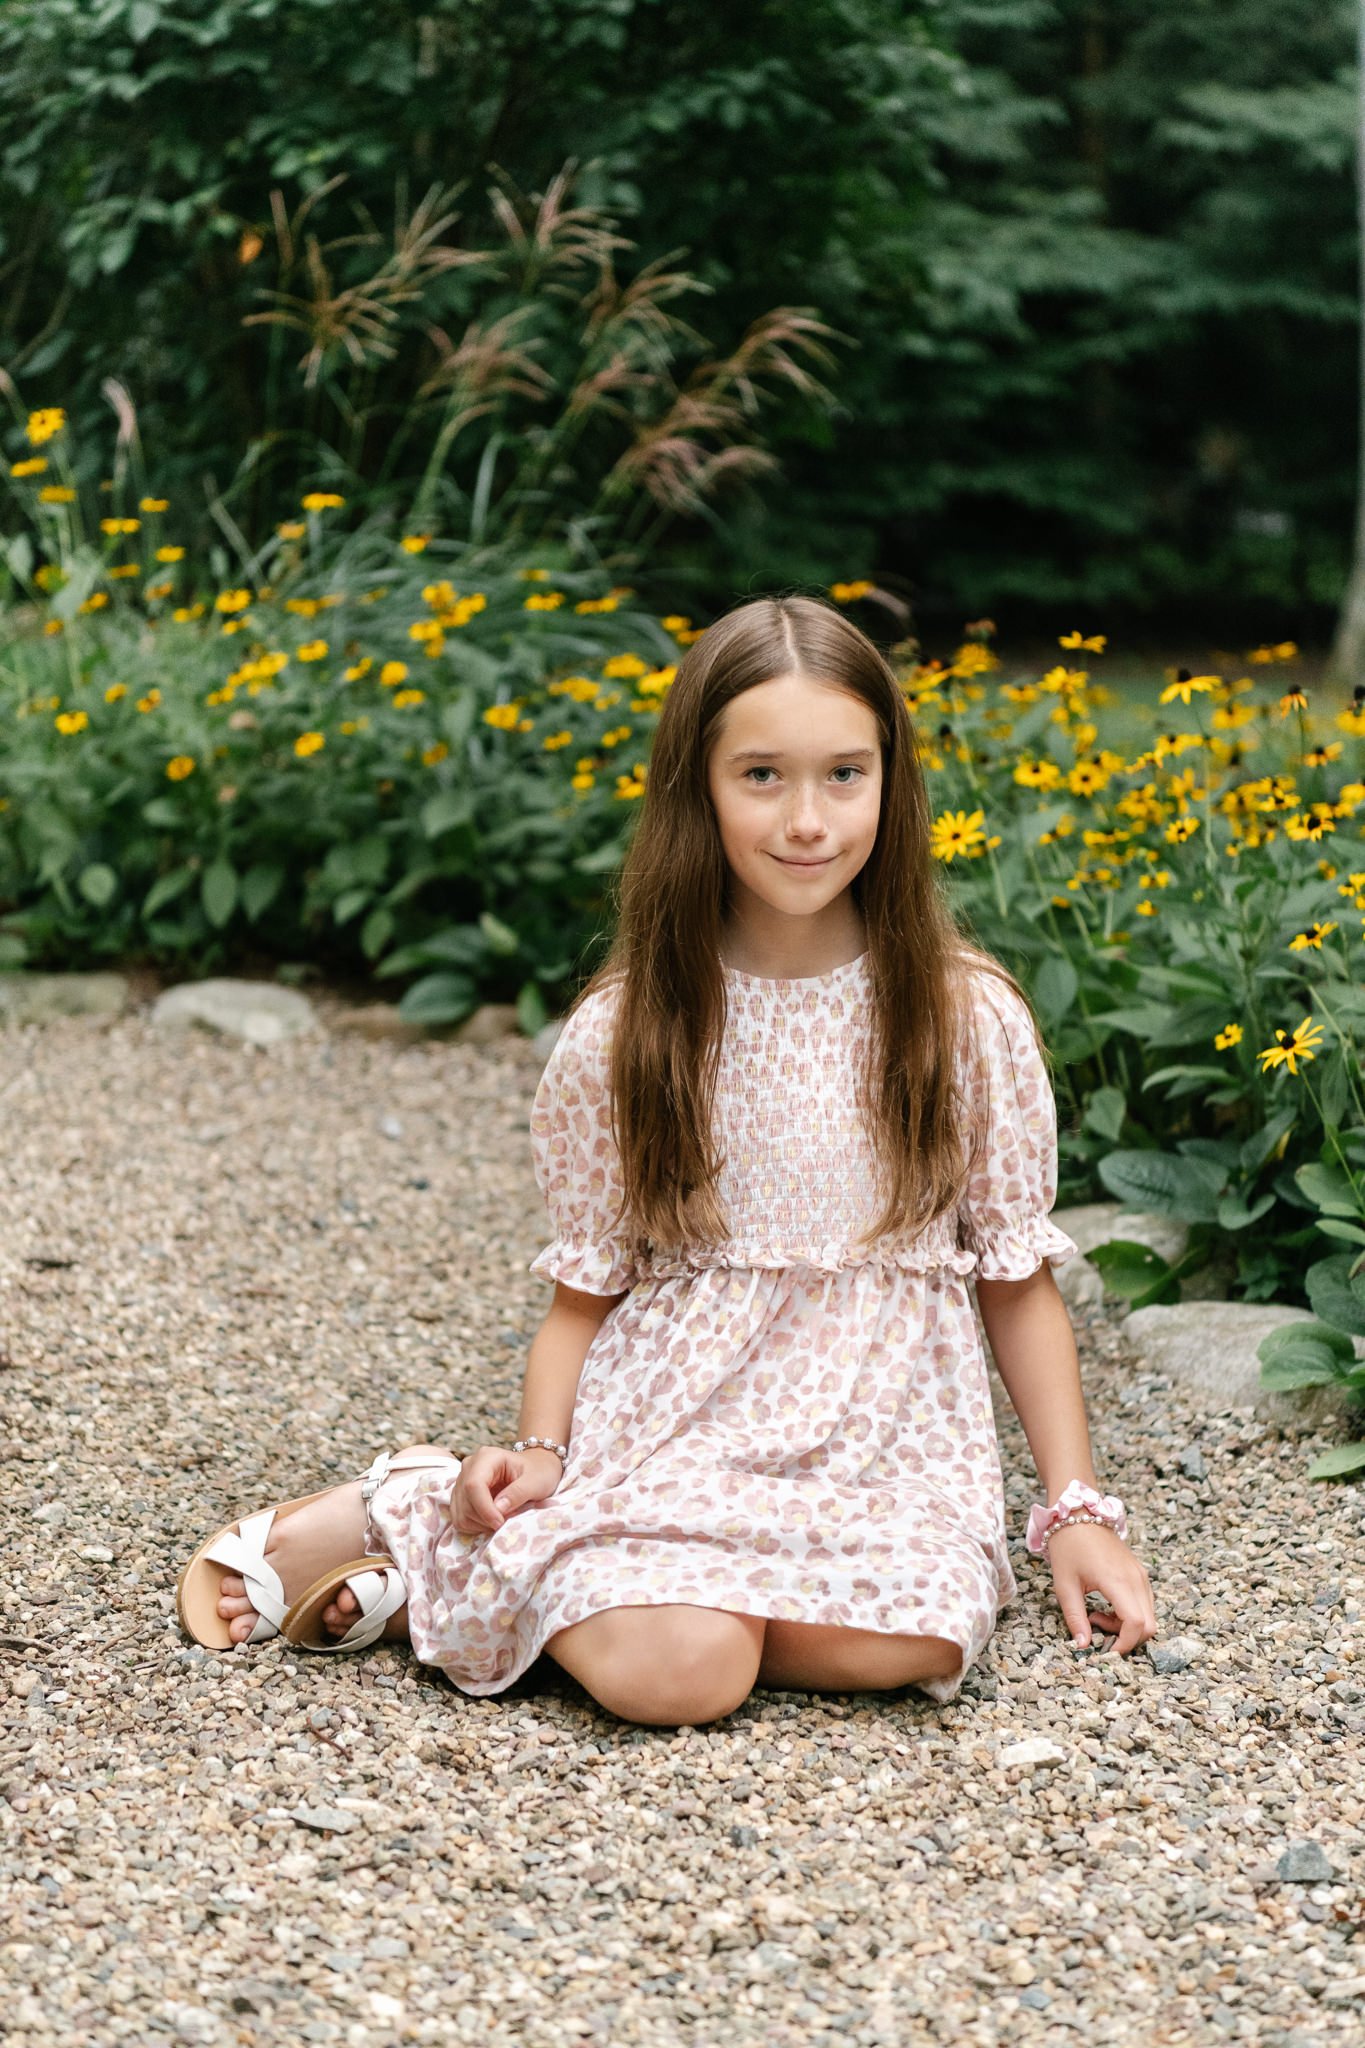  A young girl in a floral dress poses for her portrait in front of yellow flowers by Nicole Hawkins Photography. girl in floral dress #NicoleHawkinsPhotography #NicoleHawkinsFamilyPortrait #NicoleHawkinsSenior #NJPortraits #siblingportrait 